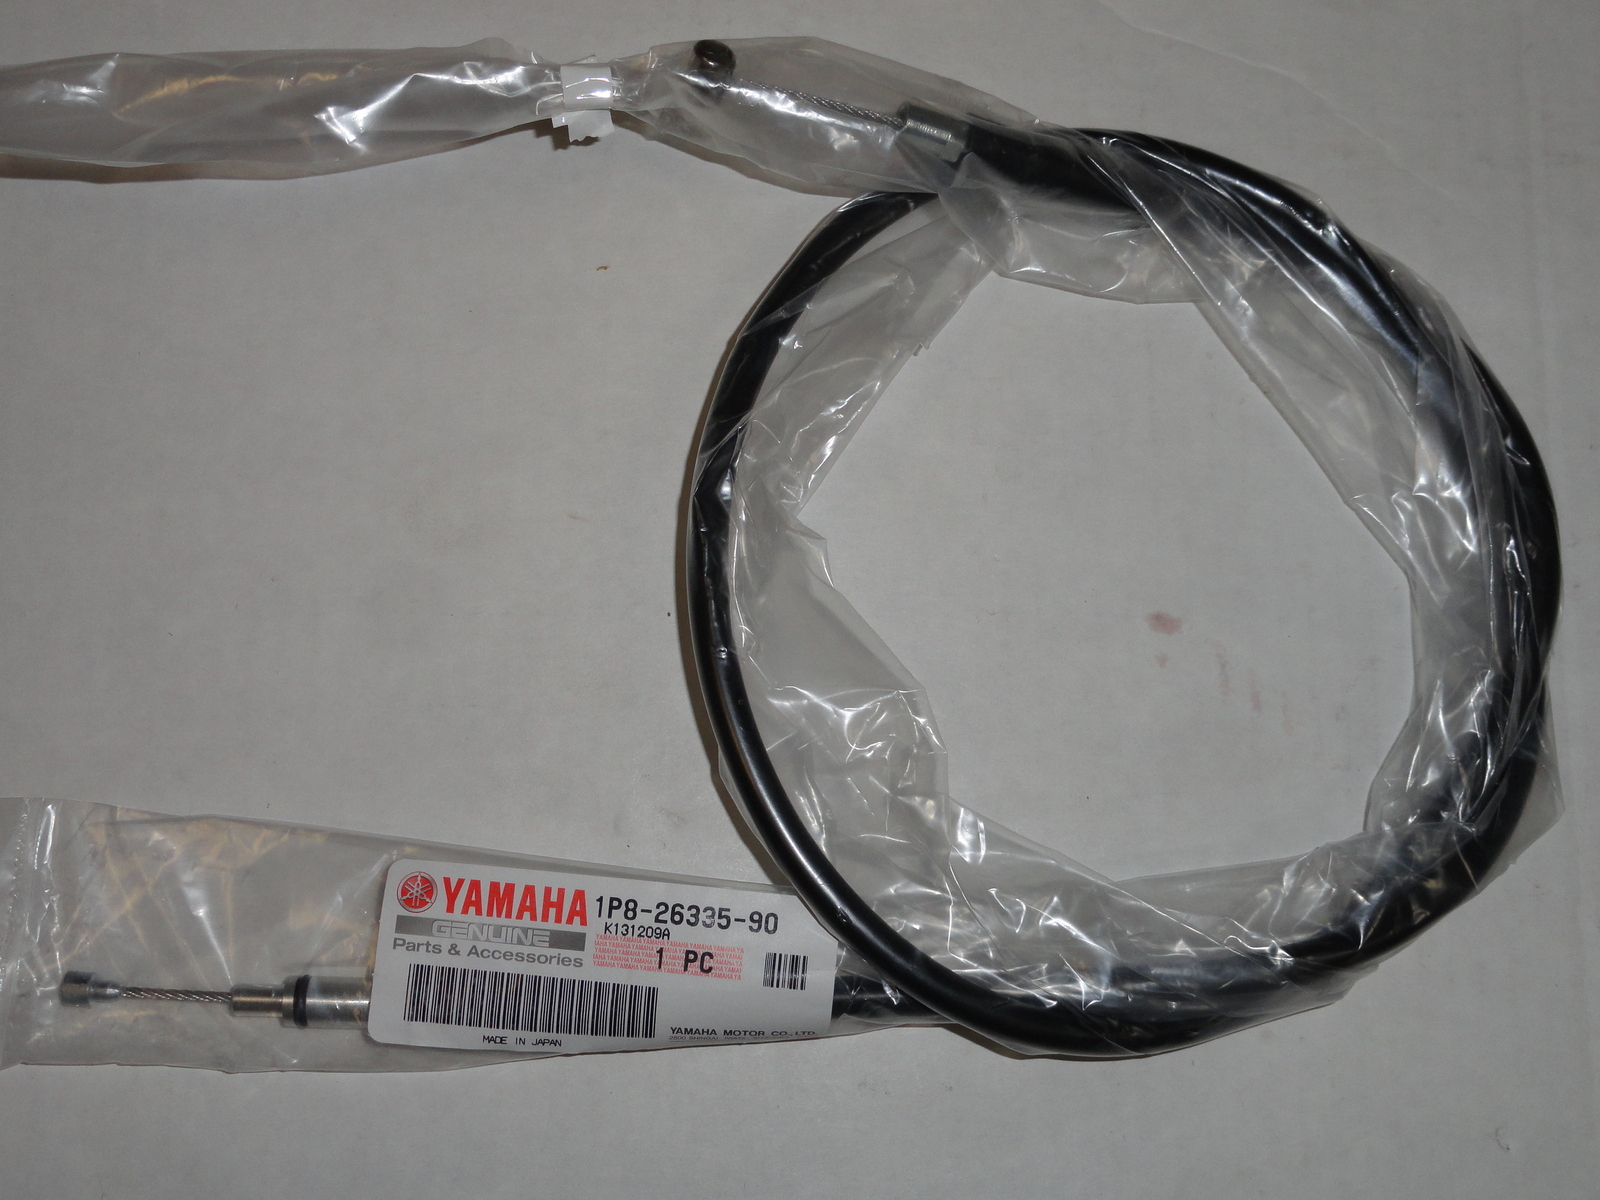 Primary image for Clutch Cable OEM Genuine Yamaha YZ250 YZ 250 05-14 1P8-26335-90-00